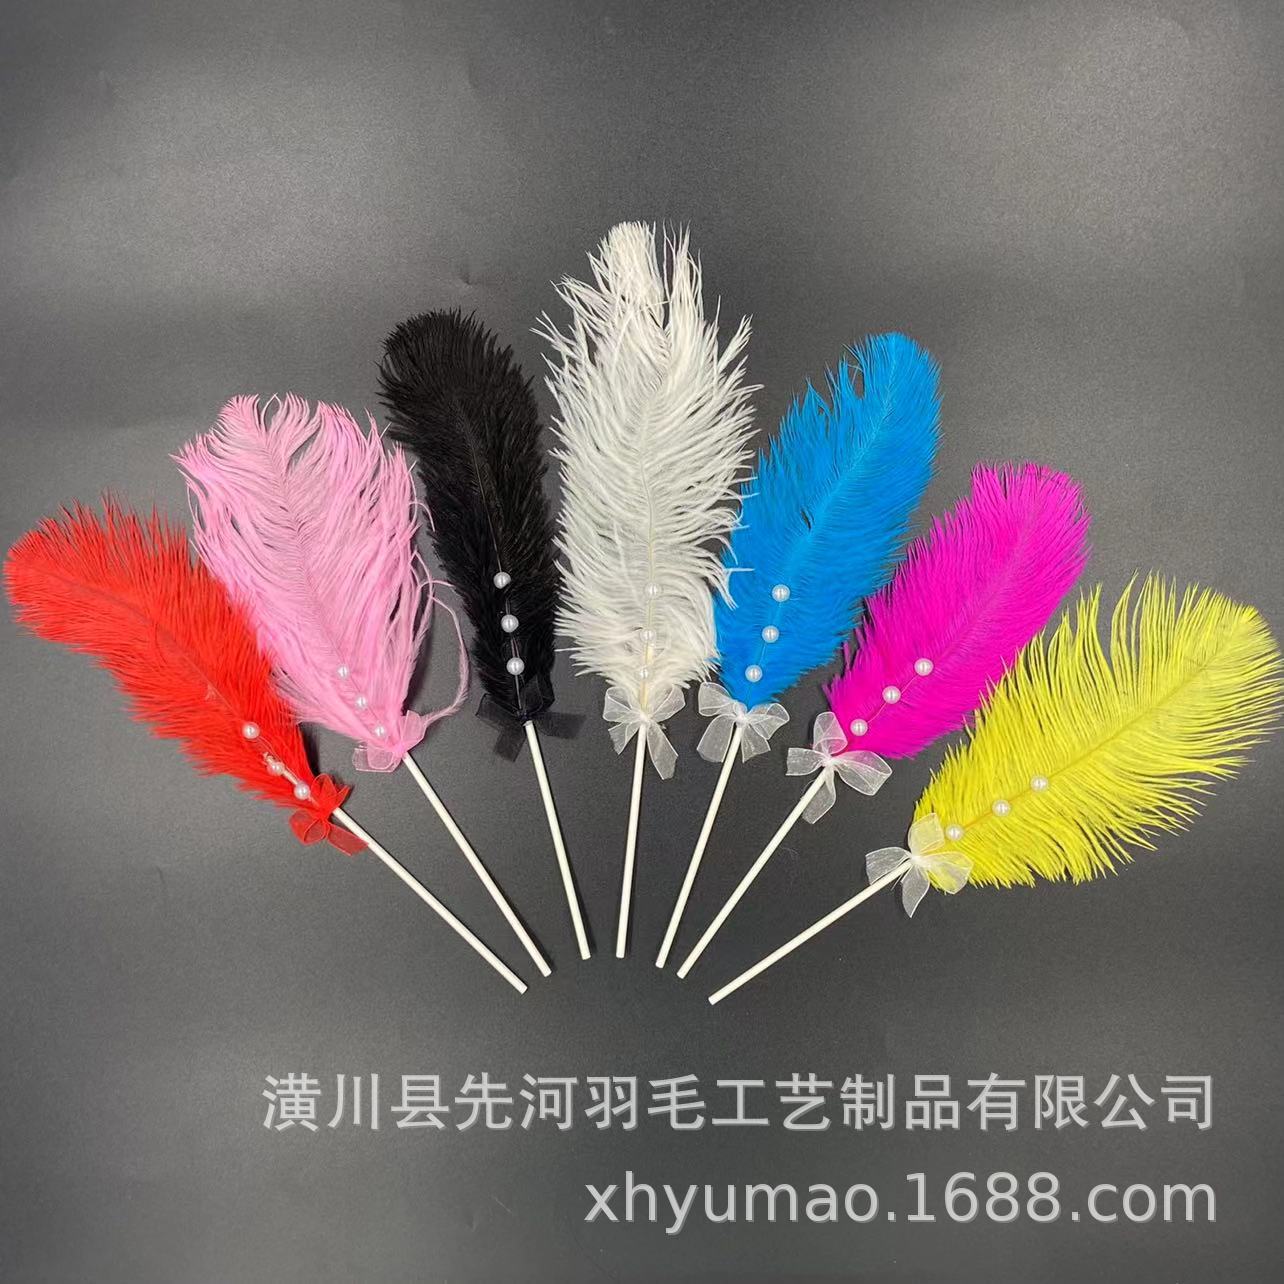 internet influencer pearl ostrich feather birthday cake plug-in holiday celebration gift decoration accessories